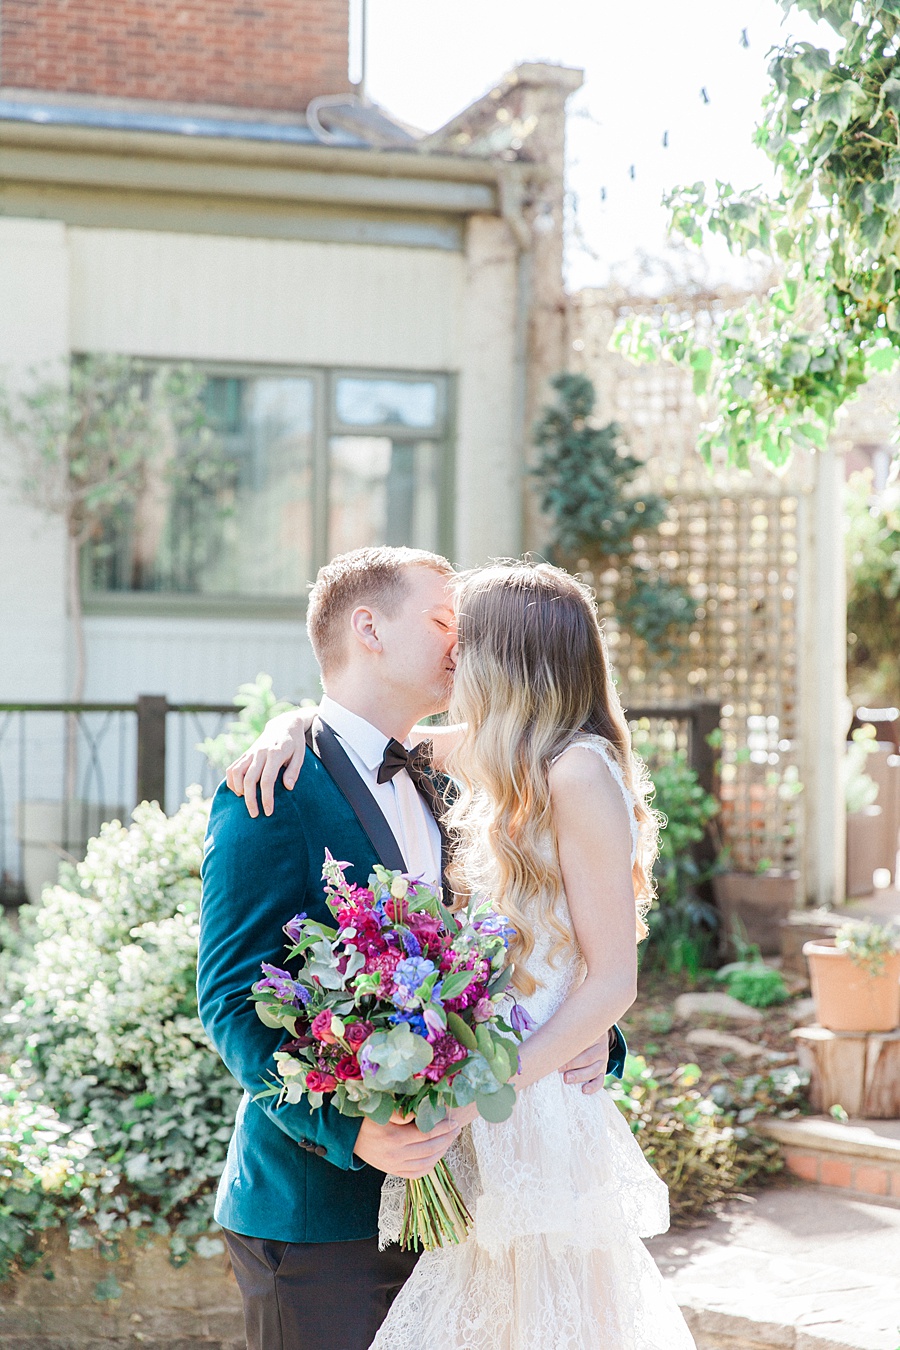 inspiration for a Greek wedding, photo credit Maxeen Kim Photography (27)